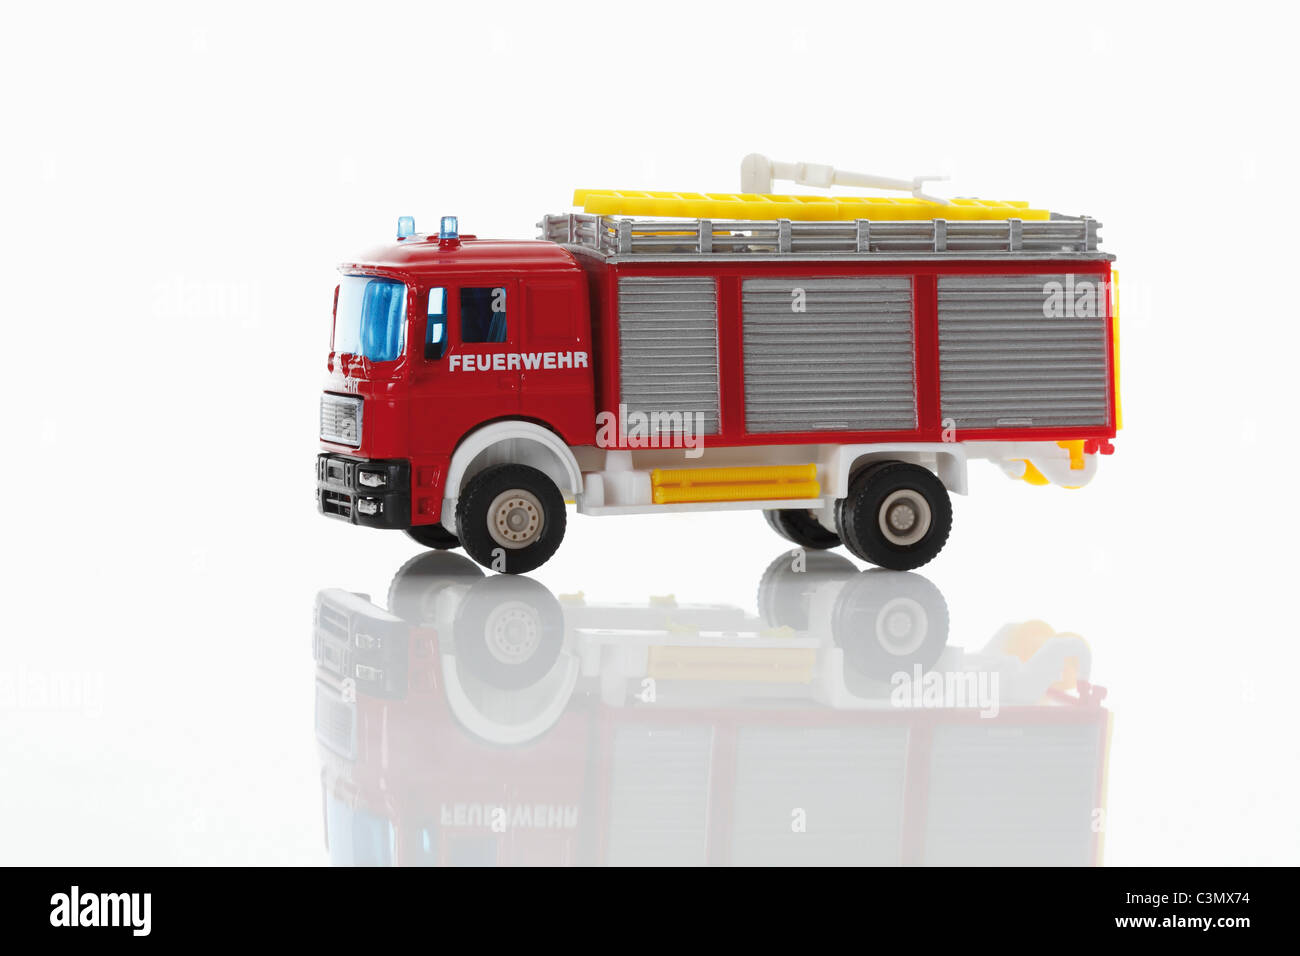 Toy fire truck on white background Stock Photo